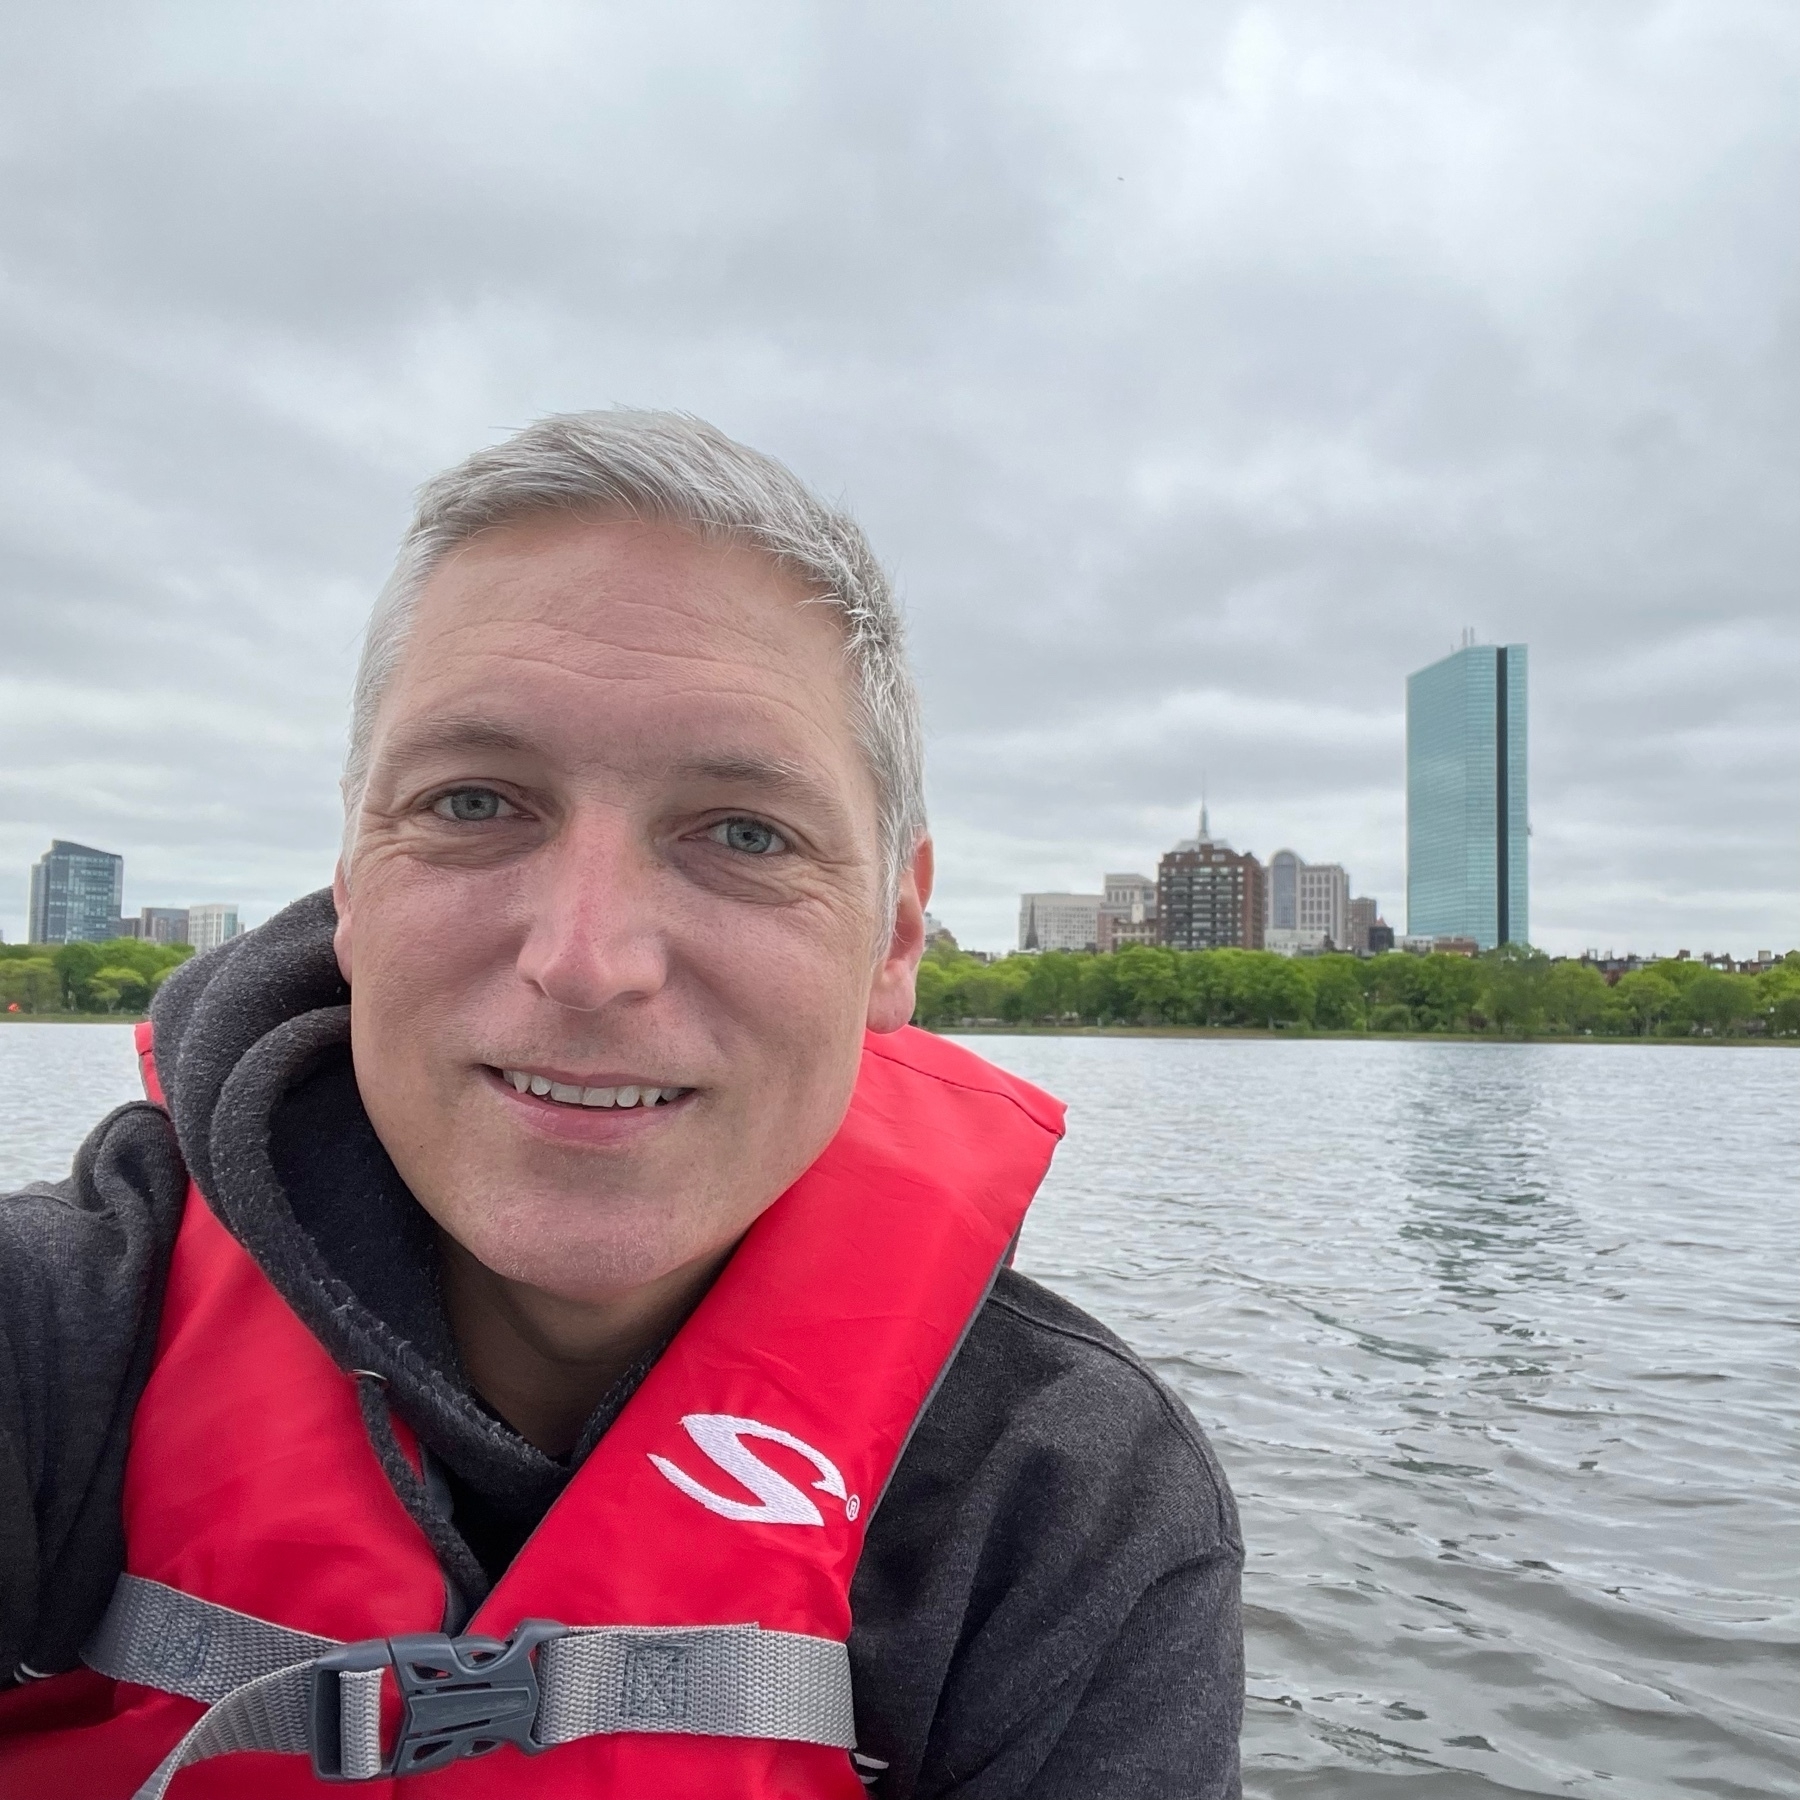 Selfie on a sailboat on the Charles river 